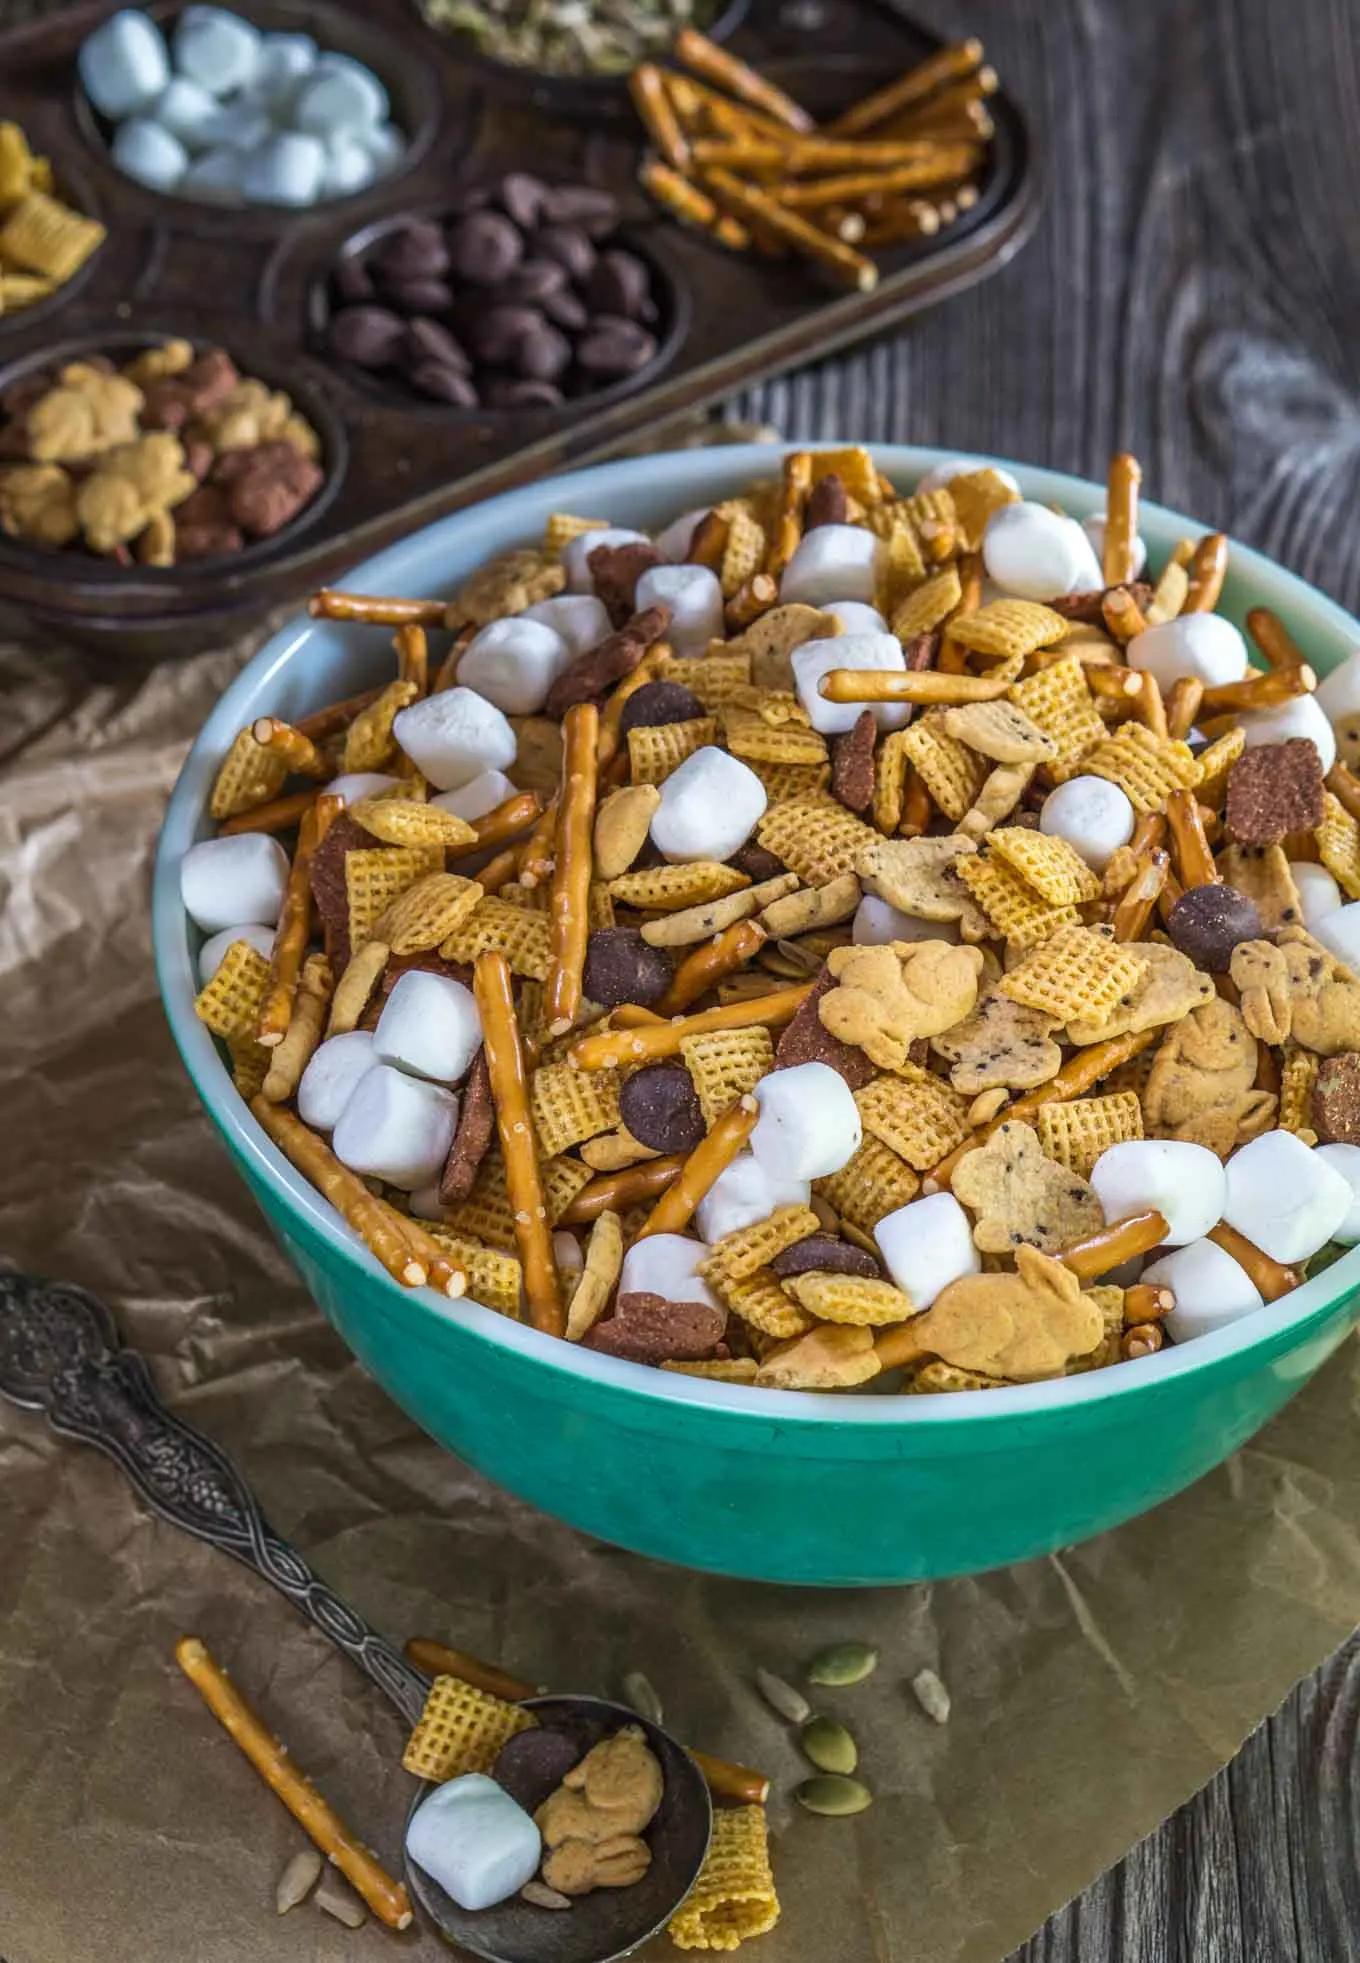 A green bowl filled with snack mix containing graham crackers shaped like bunnies, cereal squares, marshmallows, pretzel sticks, and chocolate chips. A muffin tin is in the back with the ingredients filling the muffin cavities.